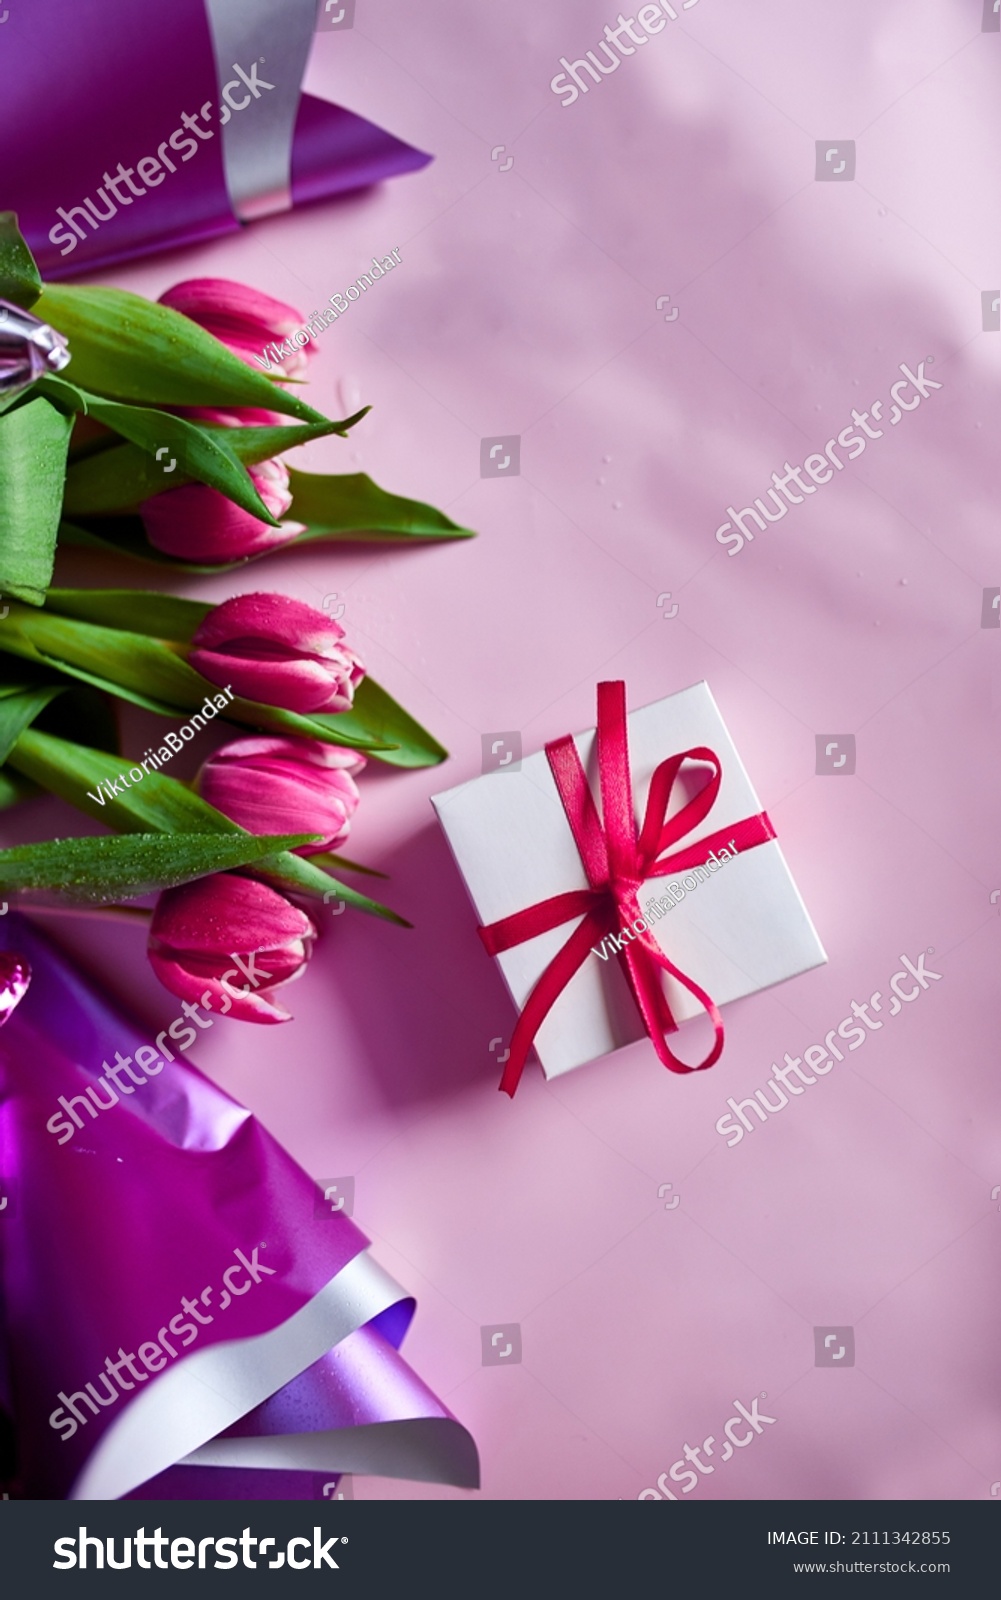 Top view pink tulips flowers in violet paper wrapper with gift box, festive background, concept of Happy Mother's day, Woman's day, birthday, 8 March, Valentines day #2111342855